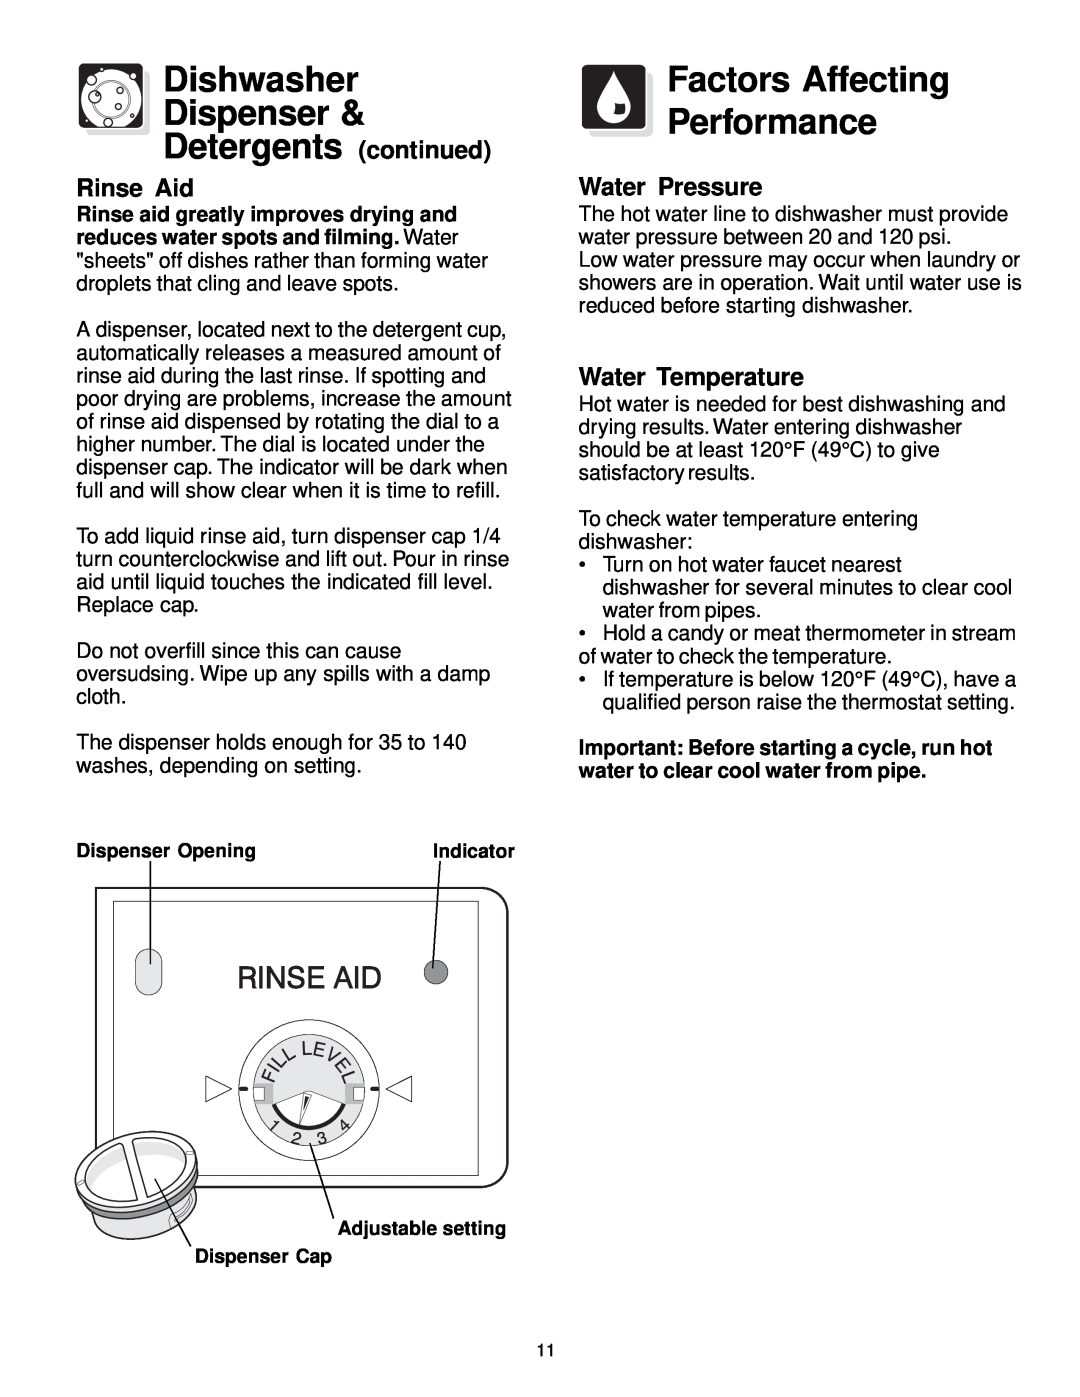 Frigidaire FDB836 Dishwasher Dispenser Detergents continued, Factors Affecting Performance, Rinse Aid, Water Pressure 